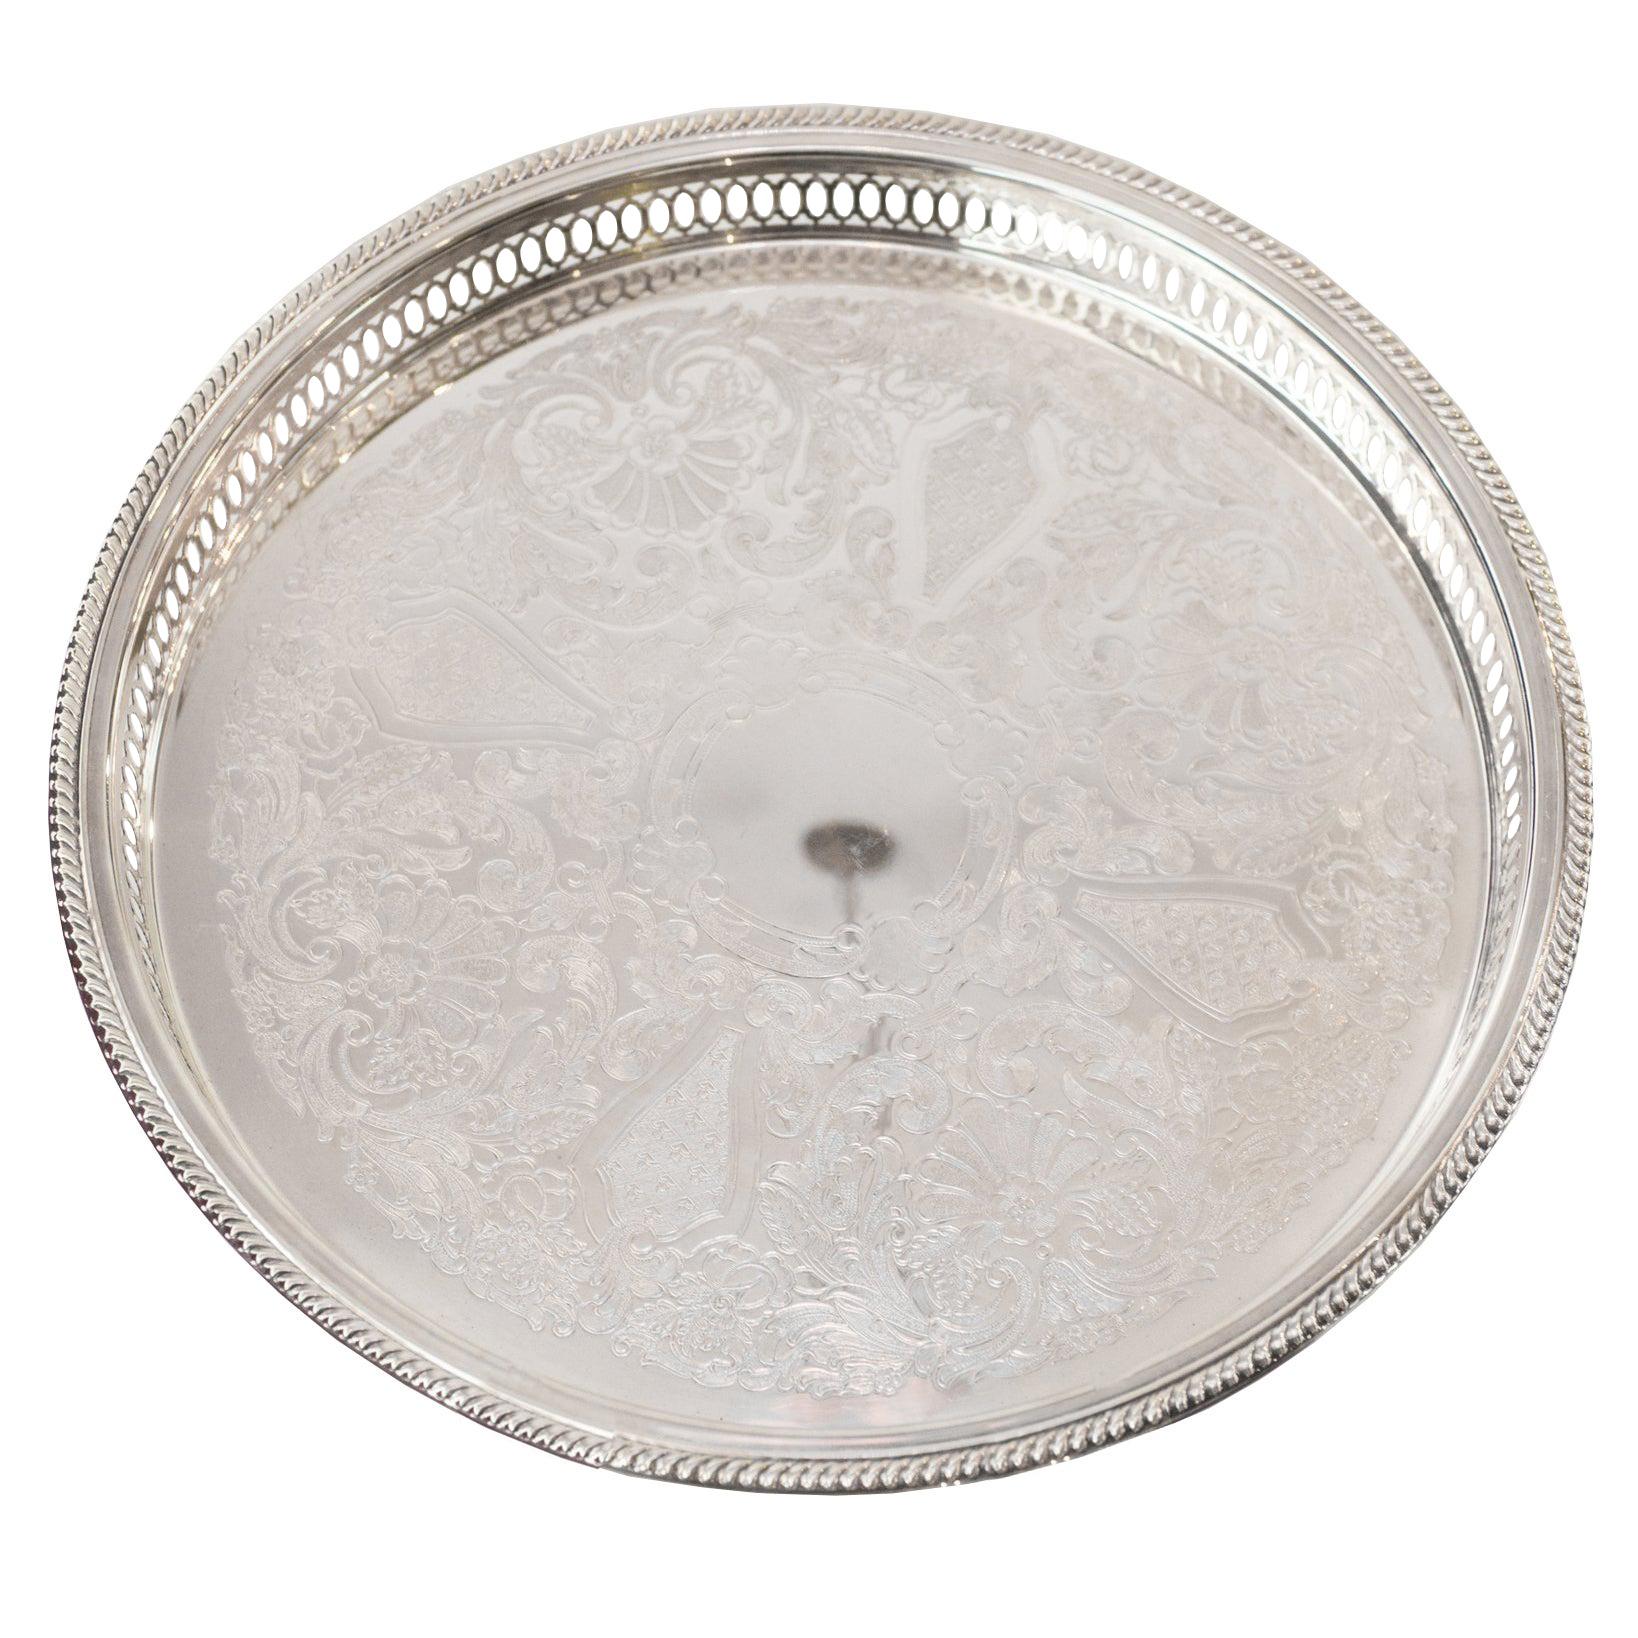 Antique Silver Plate Round Serving Tray with Gallery Rim